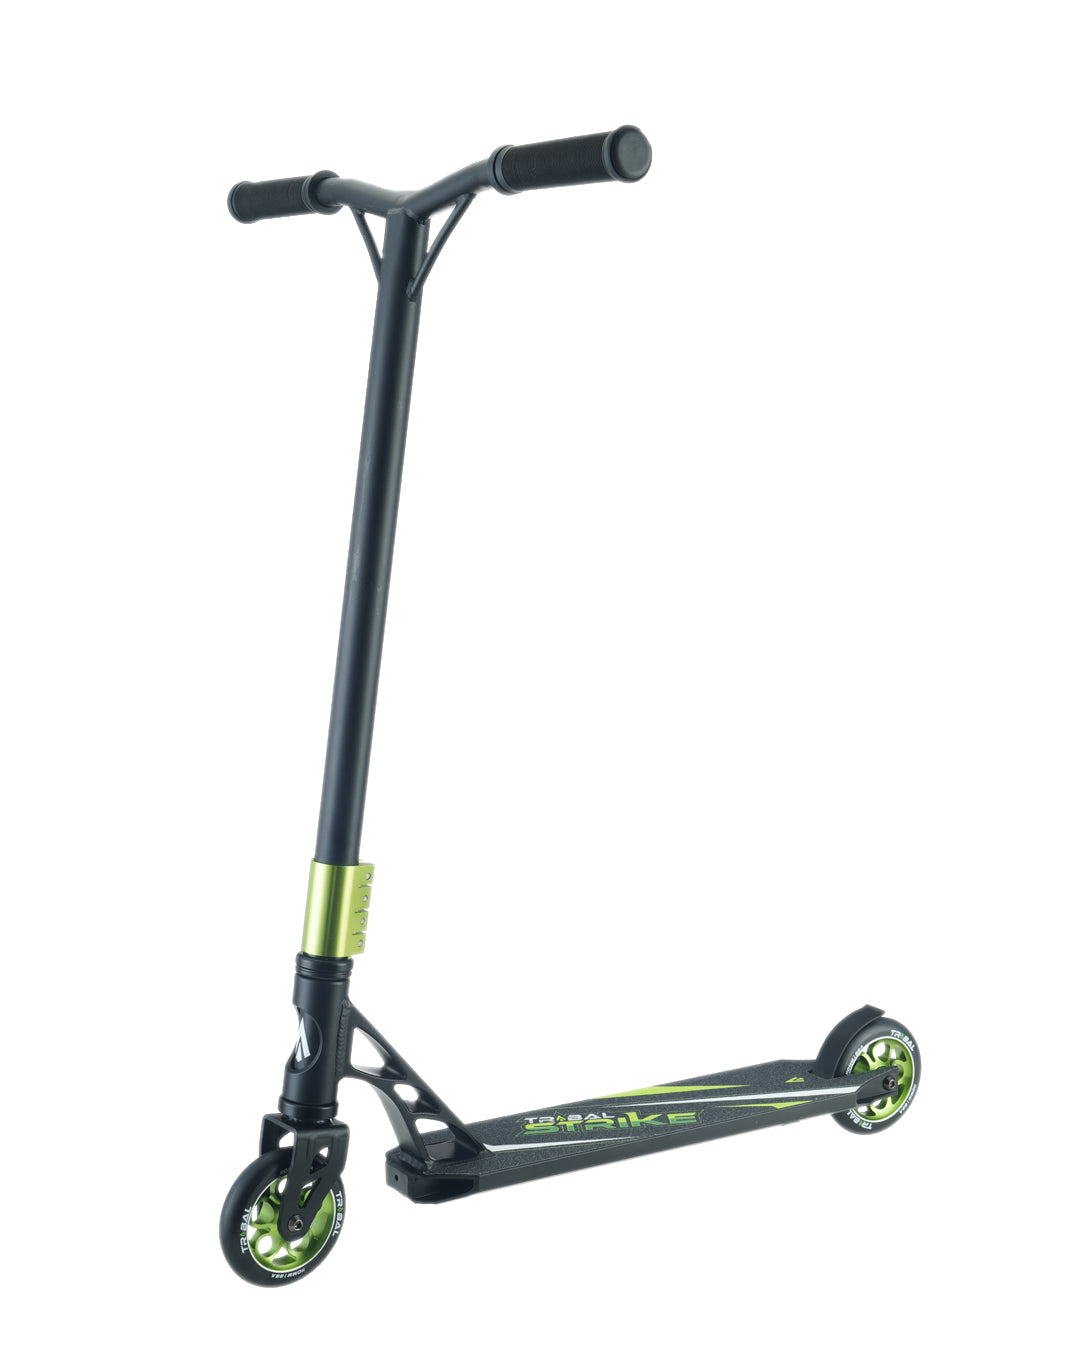 Scooter--strike-green-main-front45.jpg